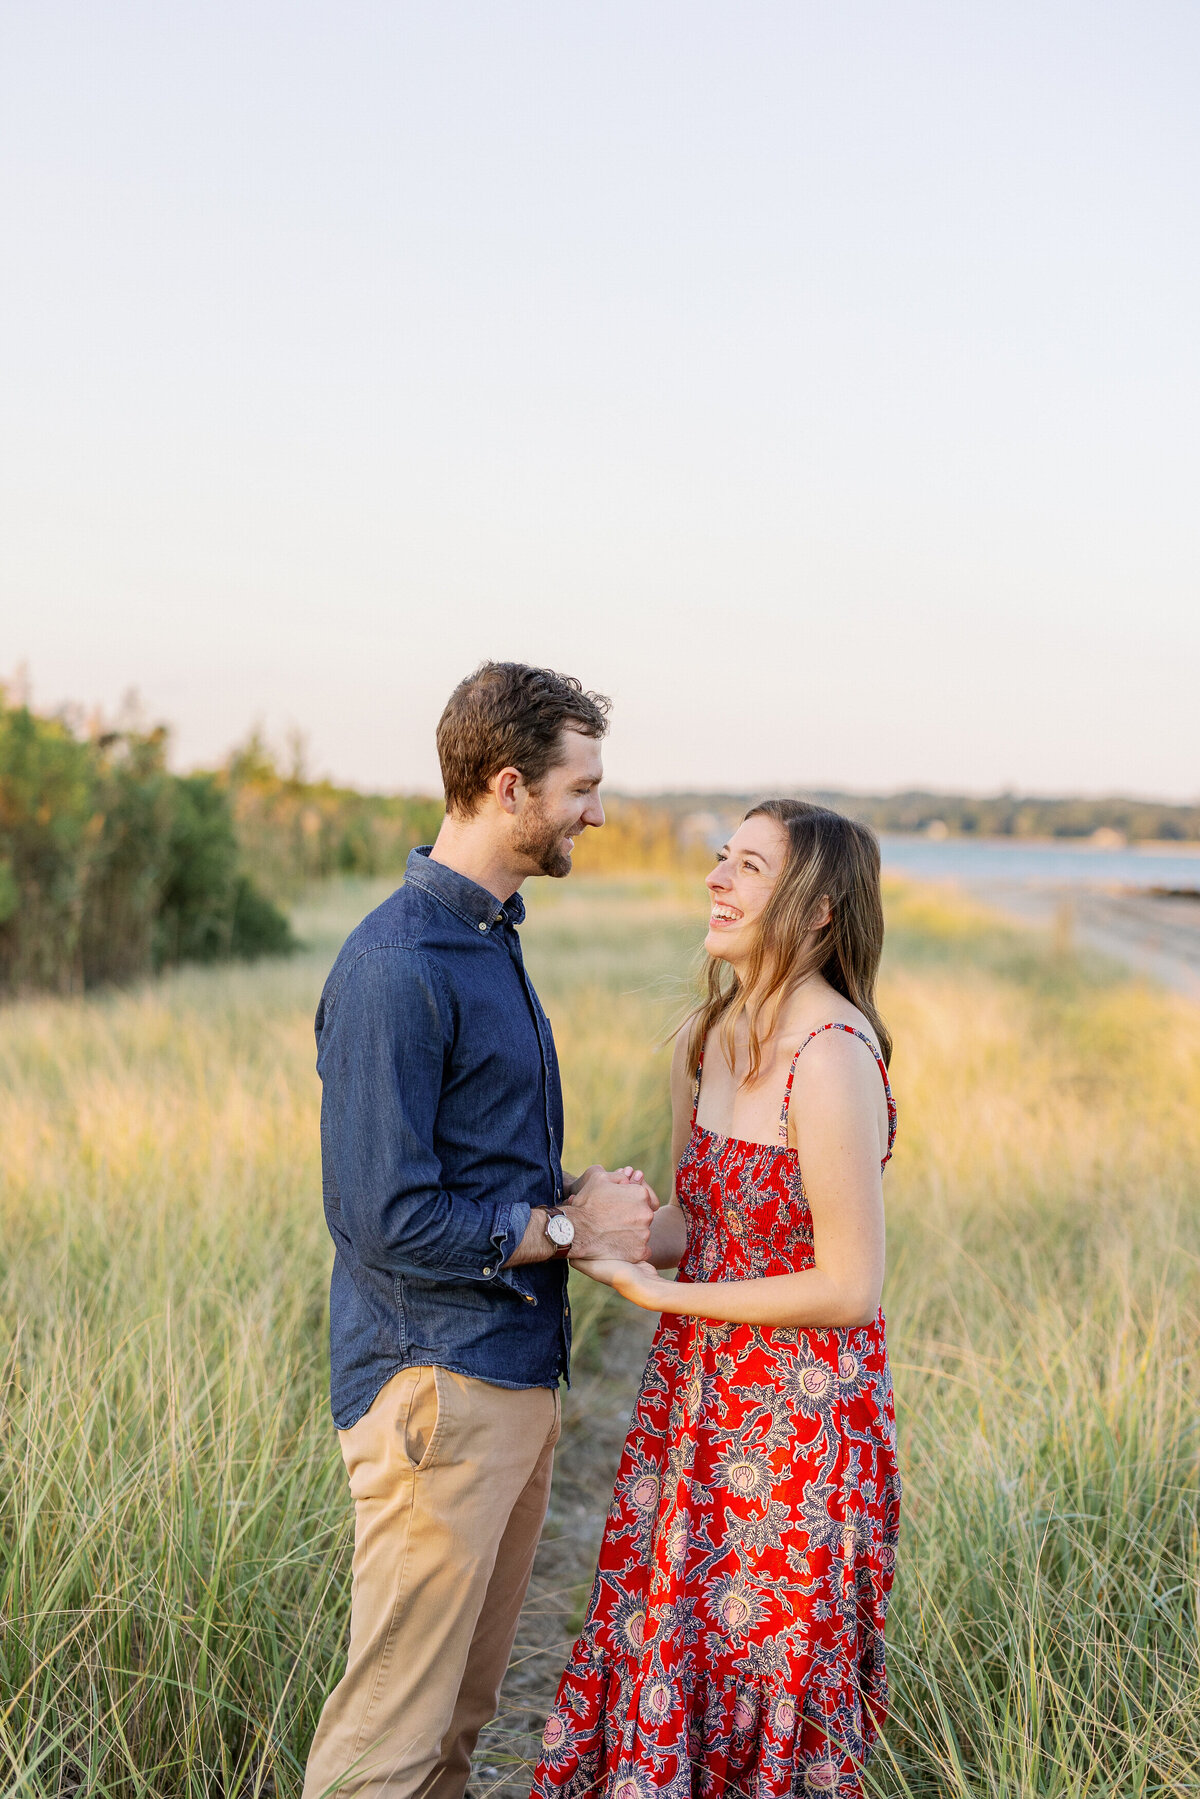 Couple standing in a field smiling as they hold hands.